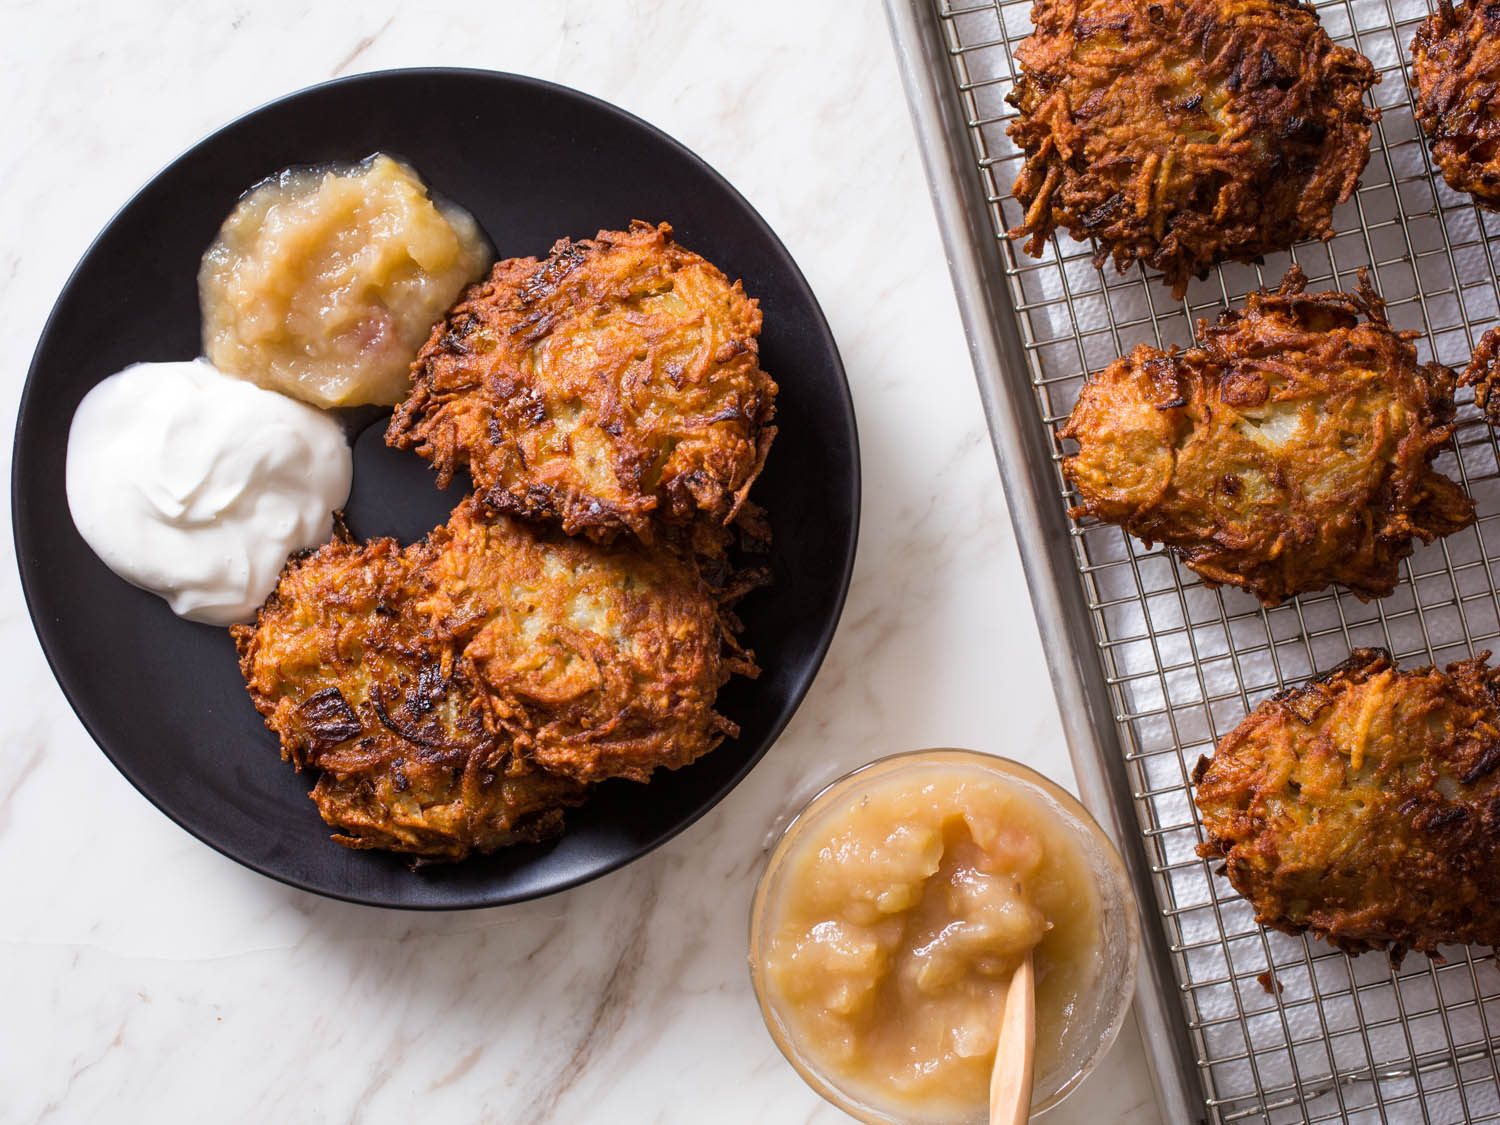 Latkes & Hanukkah go together like strawberries & cream. If you need updated recipes, we're here to help.